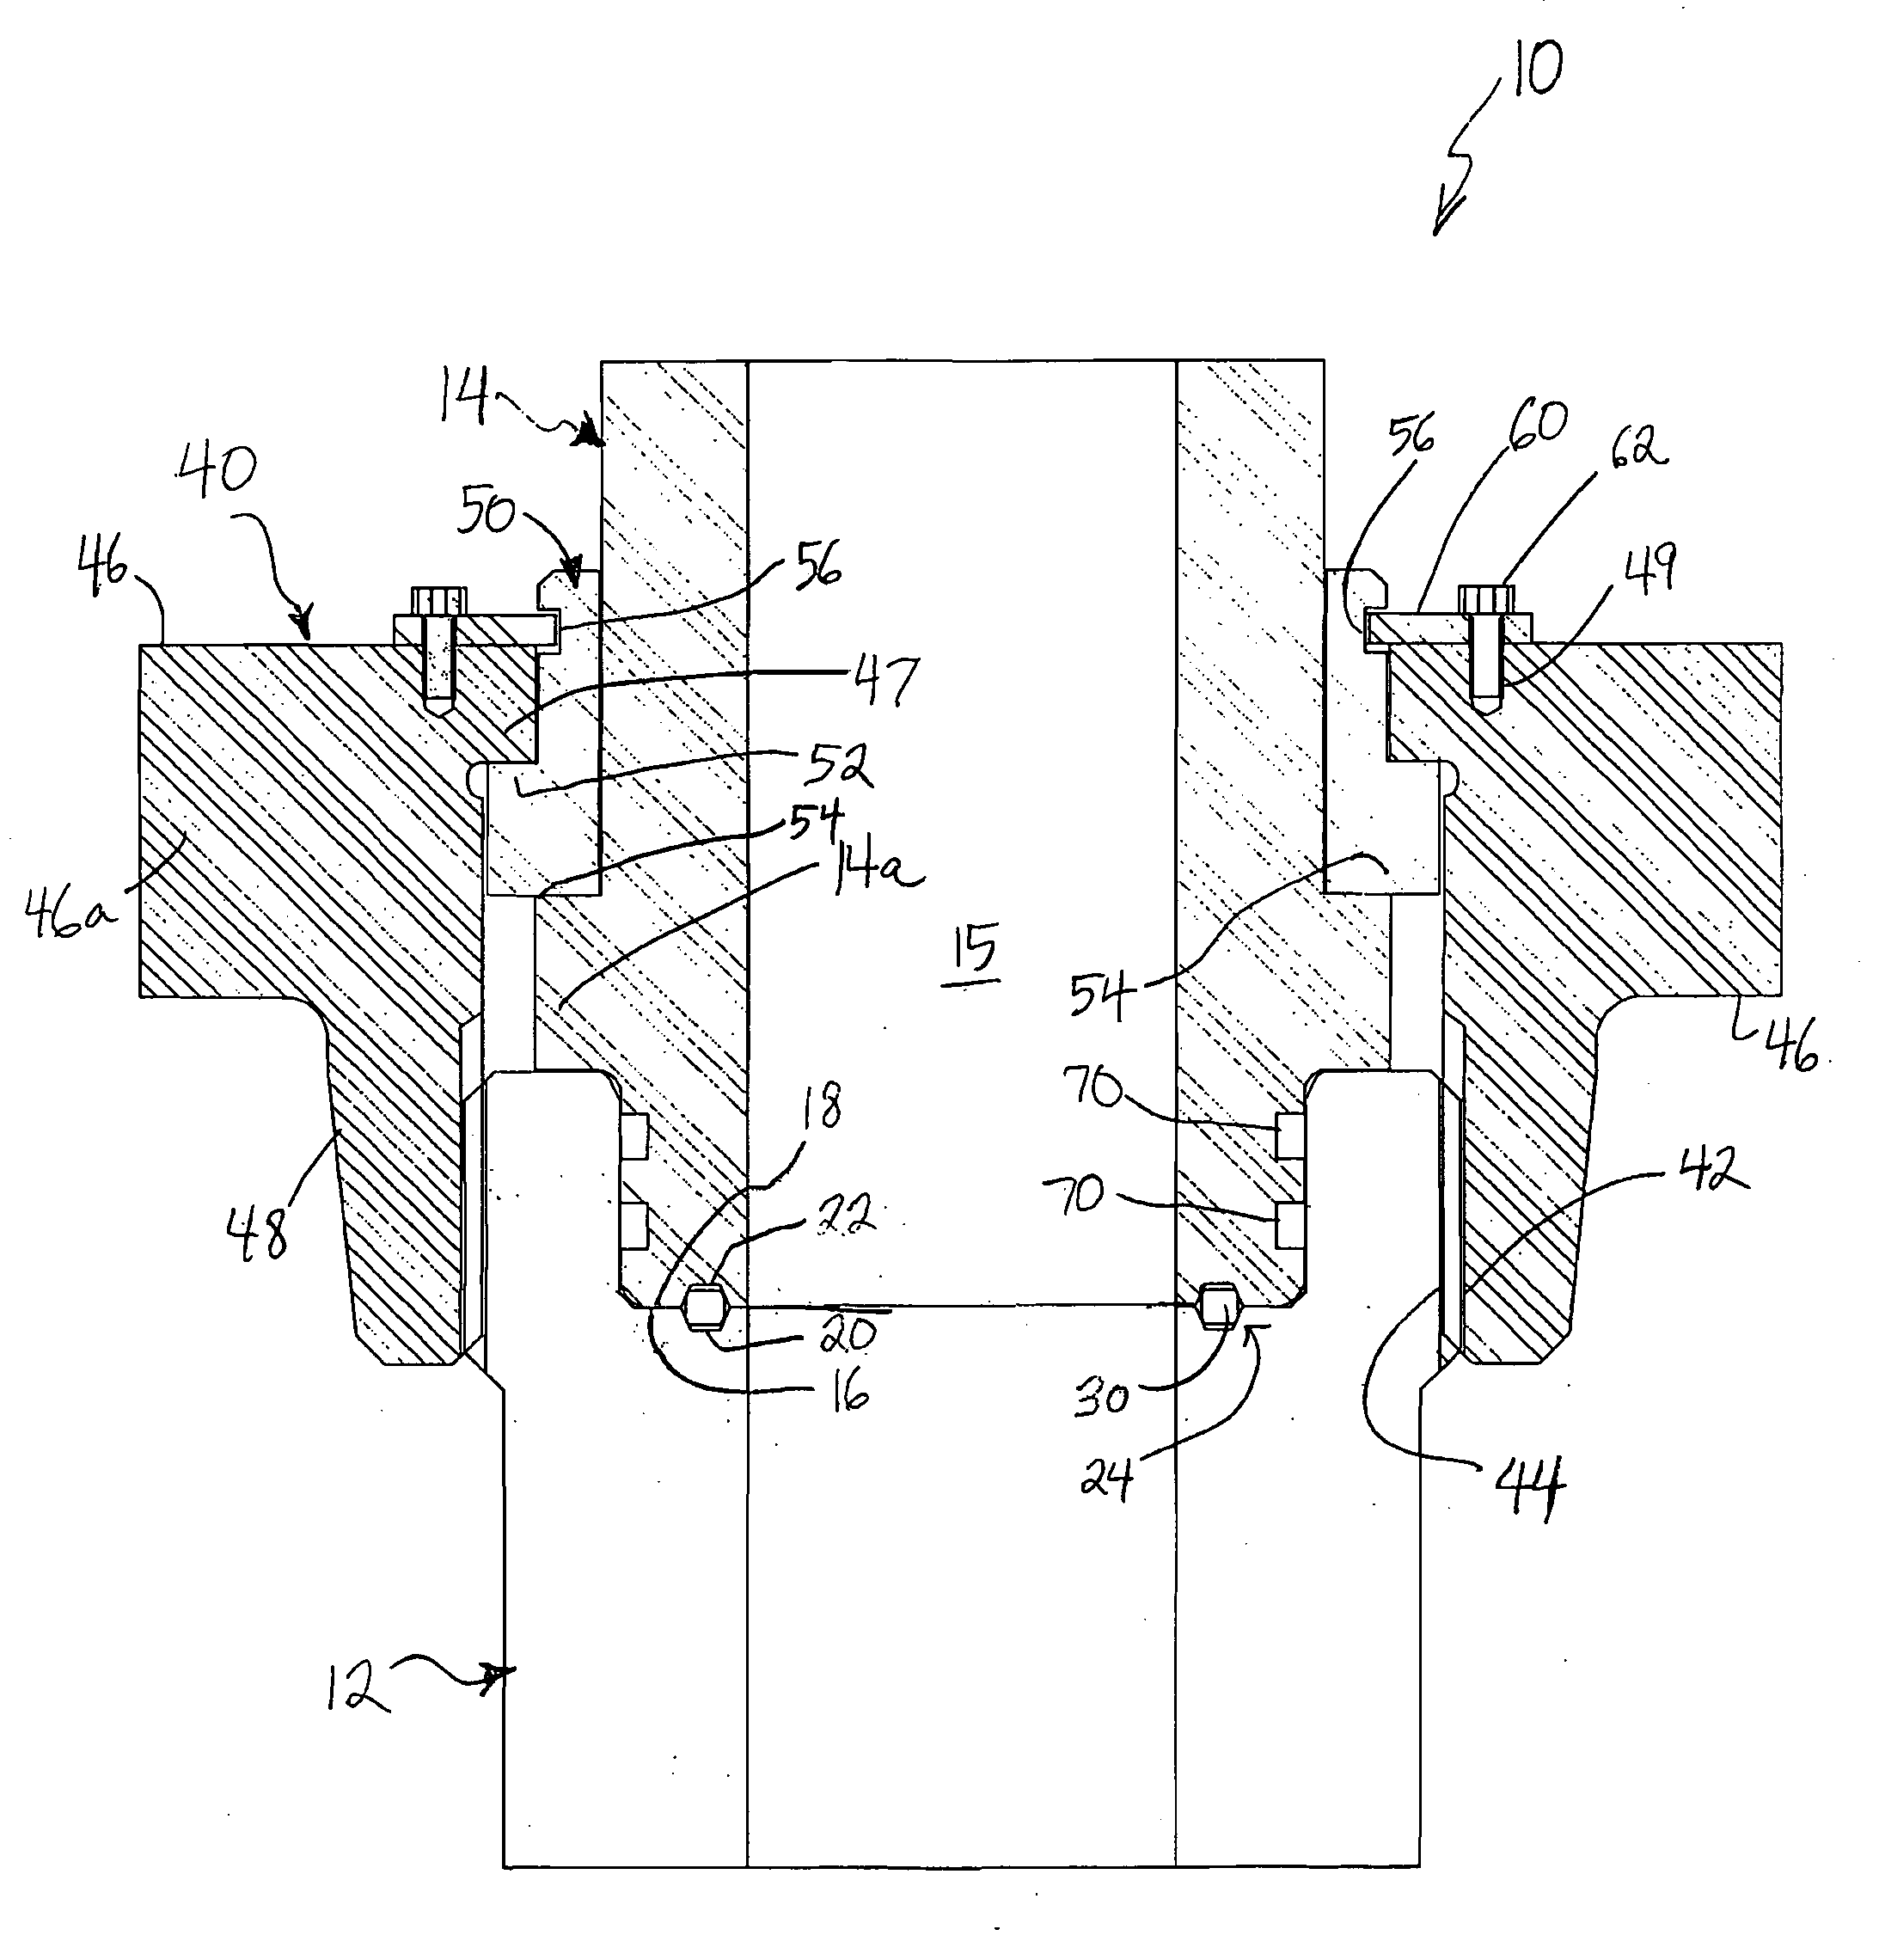 High-pressure threaded union with metal-to-metal seal, and metal ring gasket for same